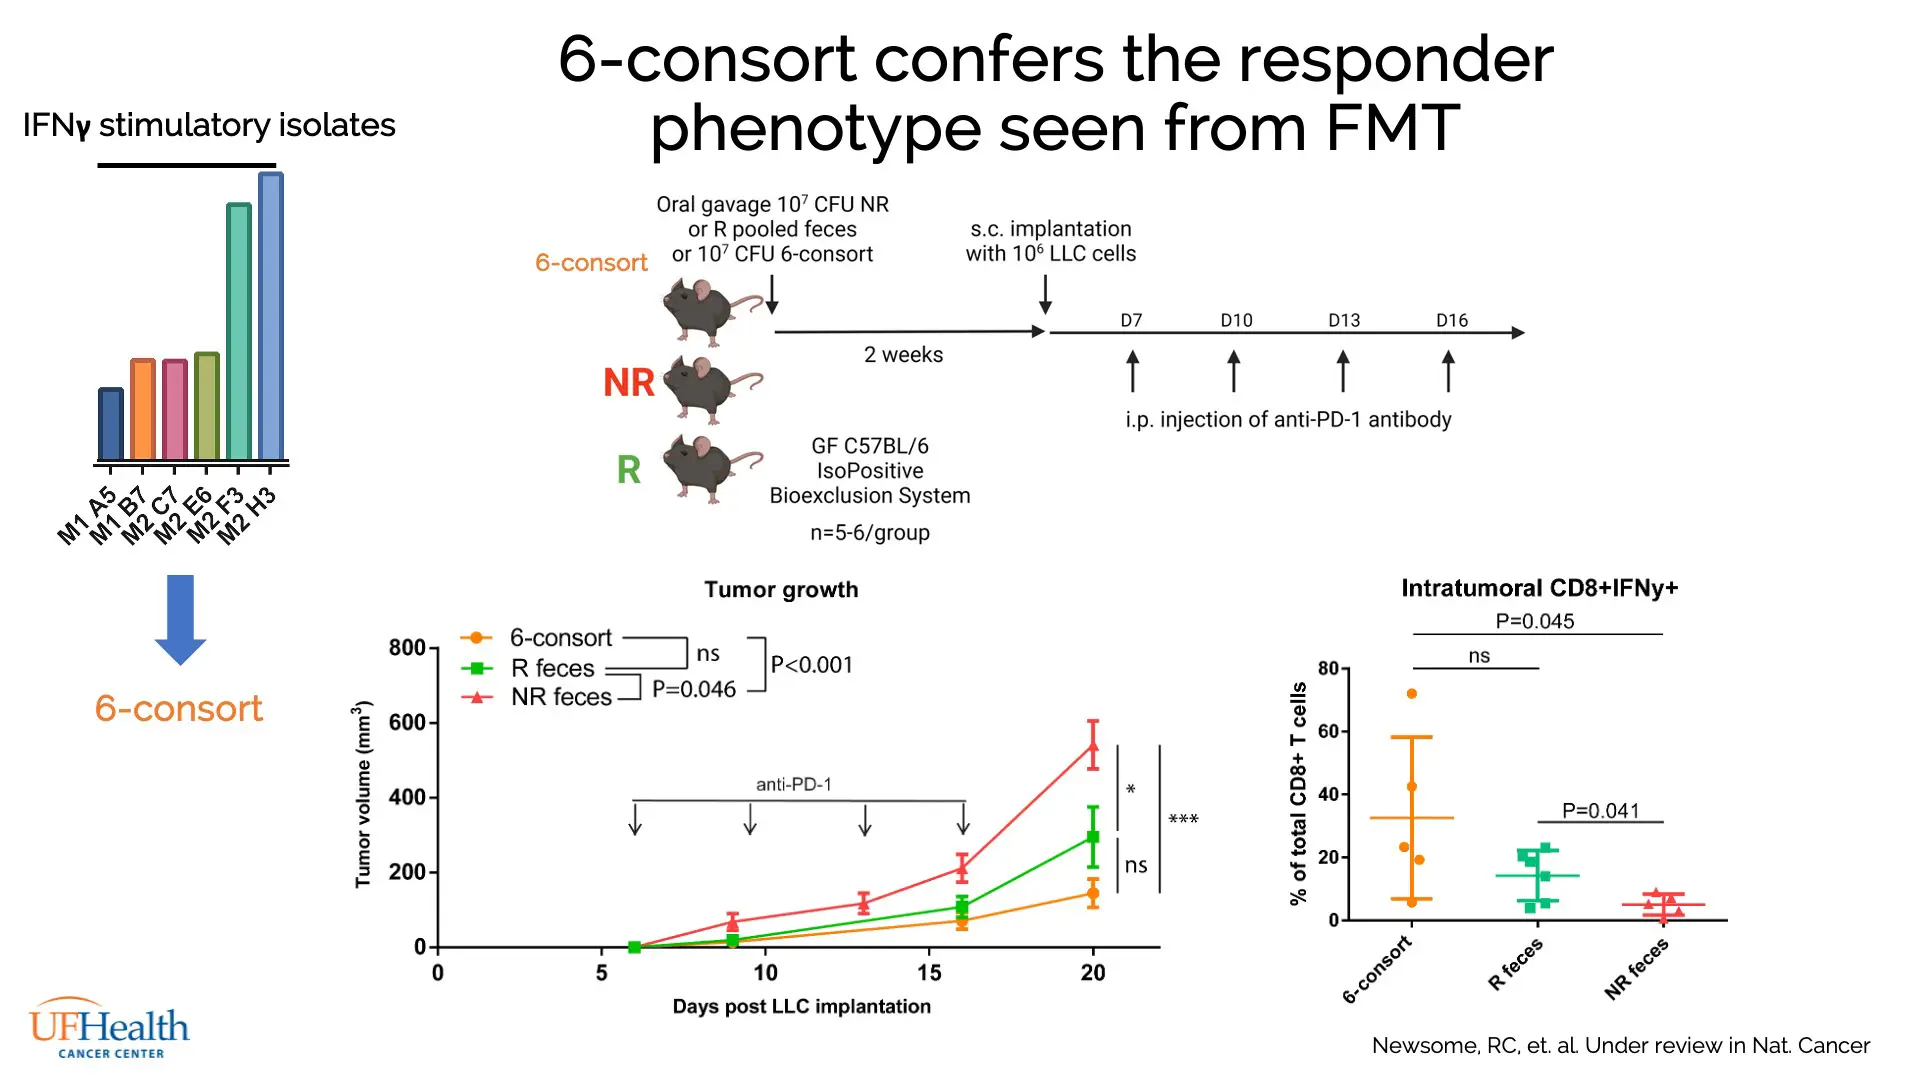 Data demonstrating the action of 6 Bacteroides species in replicating the ICI responder phenotype in mice with respect to tumor growth and intratumoral CD8+ IFNγ + response